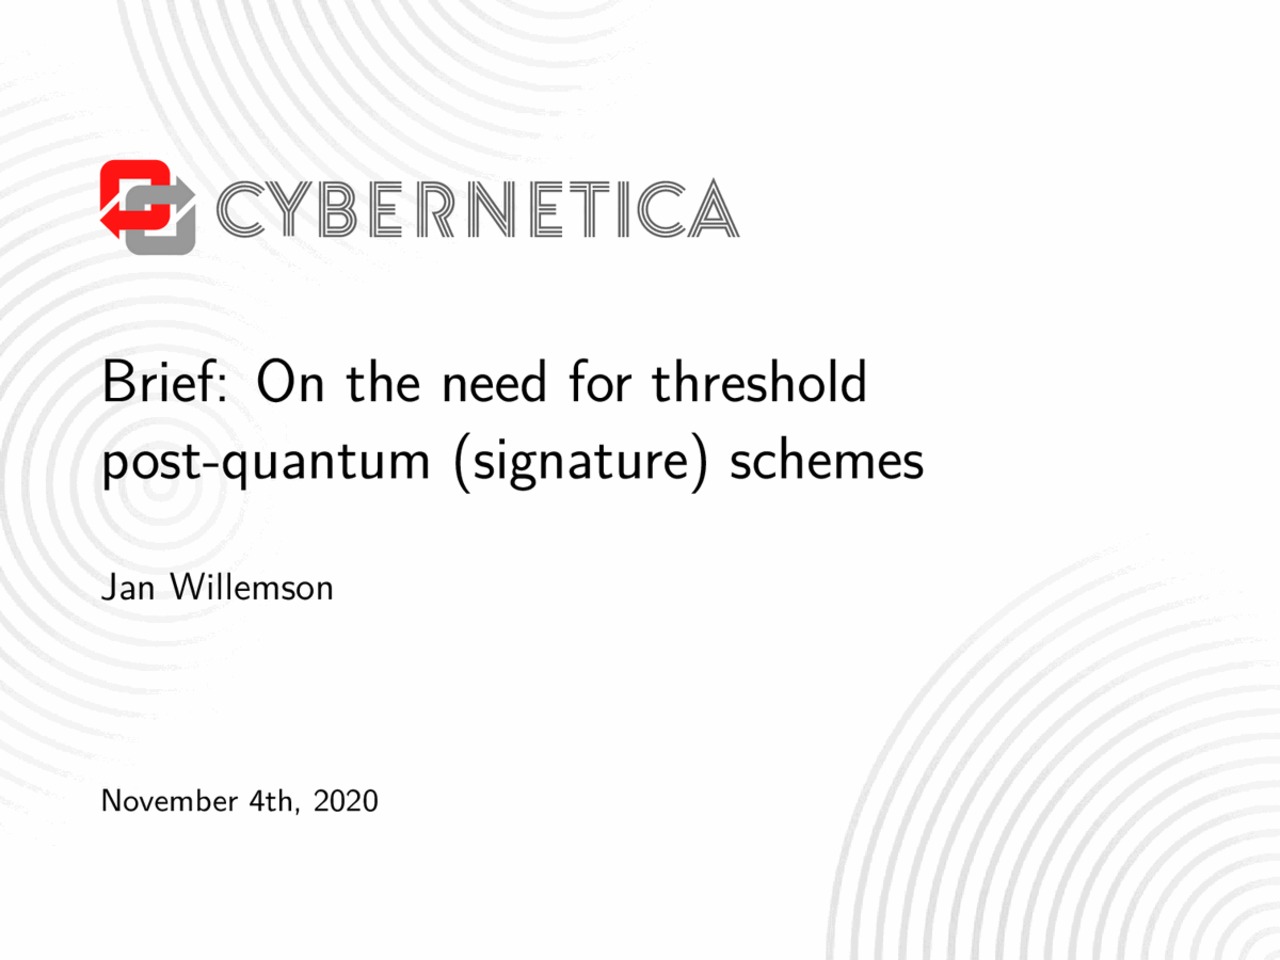 MPTS 2020 Brief 1c3: On the need for threshold post-quantum (signature) schemes